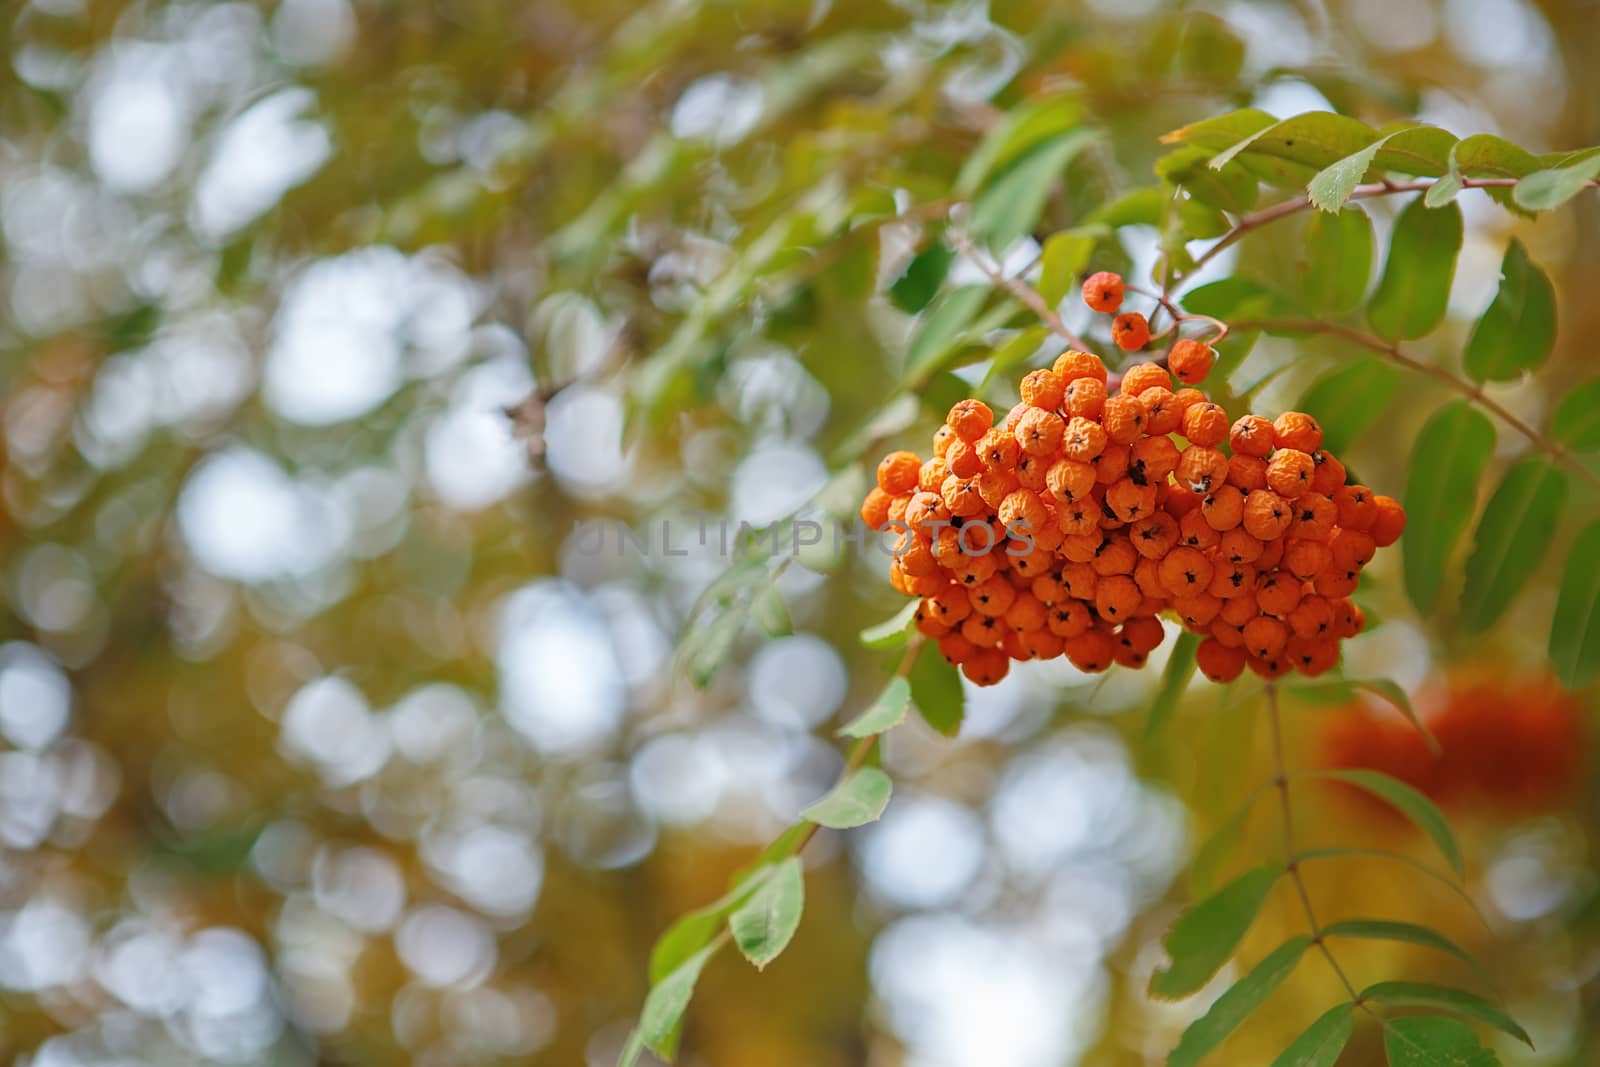 The fruits of mountain ash hanging in clusters on the branches of trees in autumn